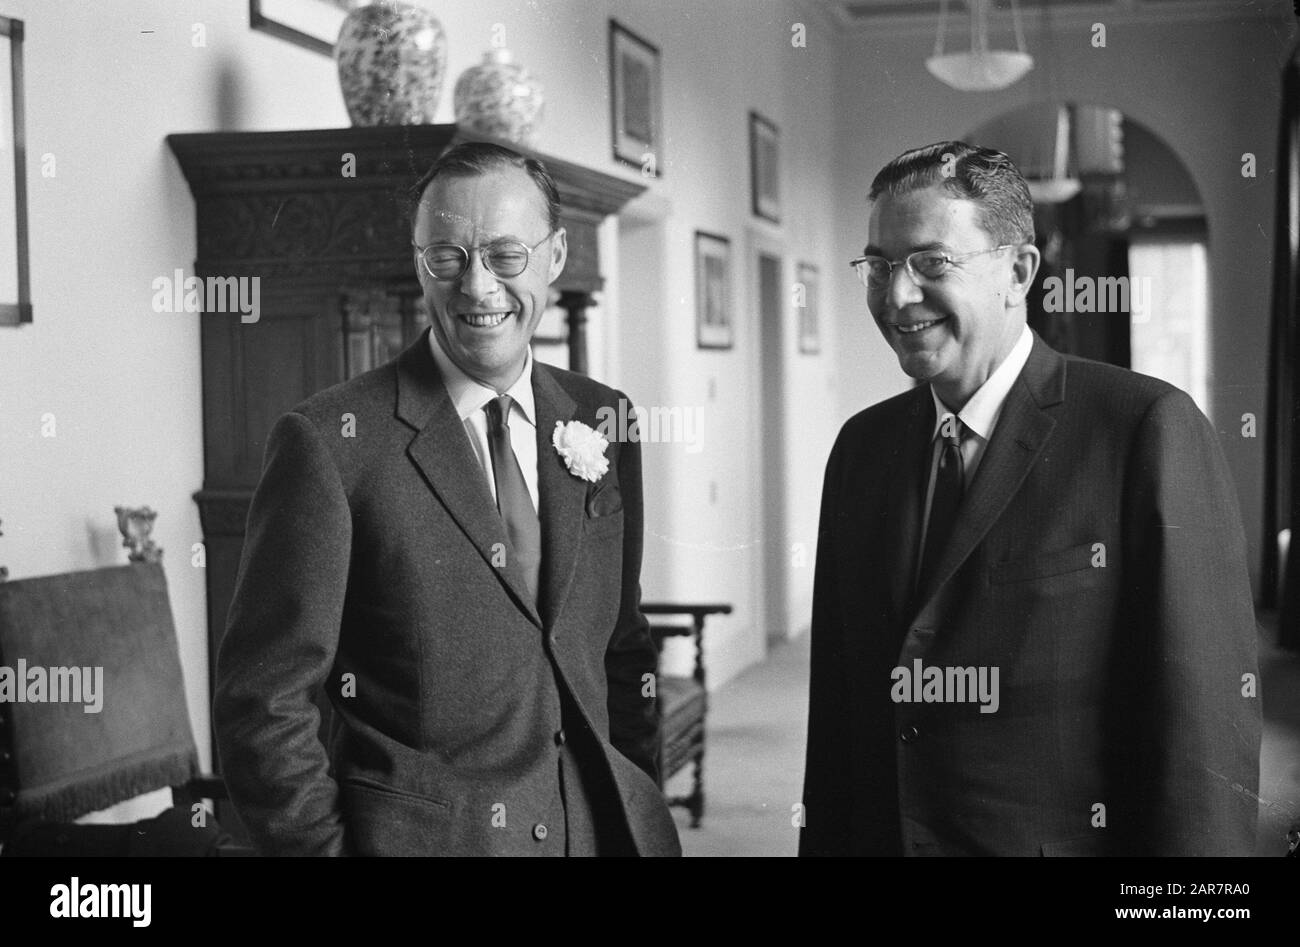 Prince Bernhard receives the governor of the American state of Georgia, Ernest Vandiver Date: March 30, 1962 Keywords: governors, royal house, receipts, princes Personal name: Bernhard (prince Nederland), Vandiver, S.E. Stock Photo